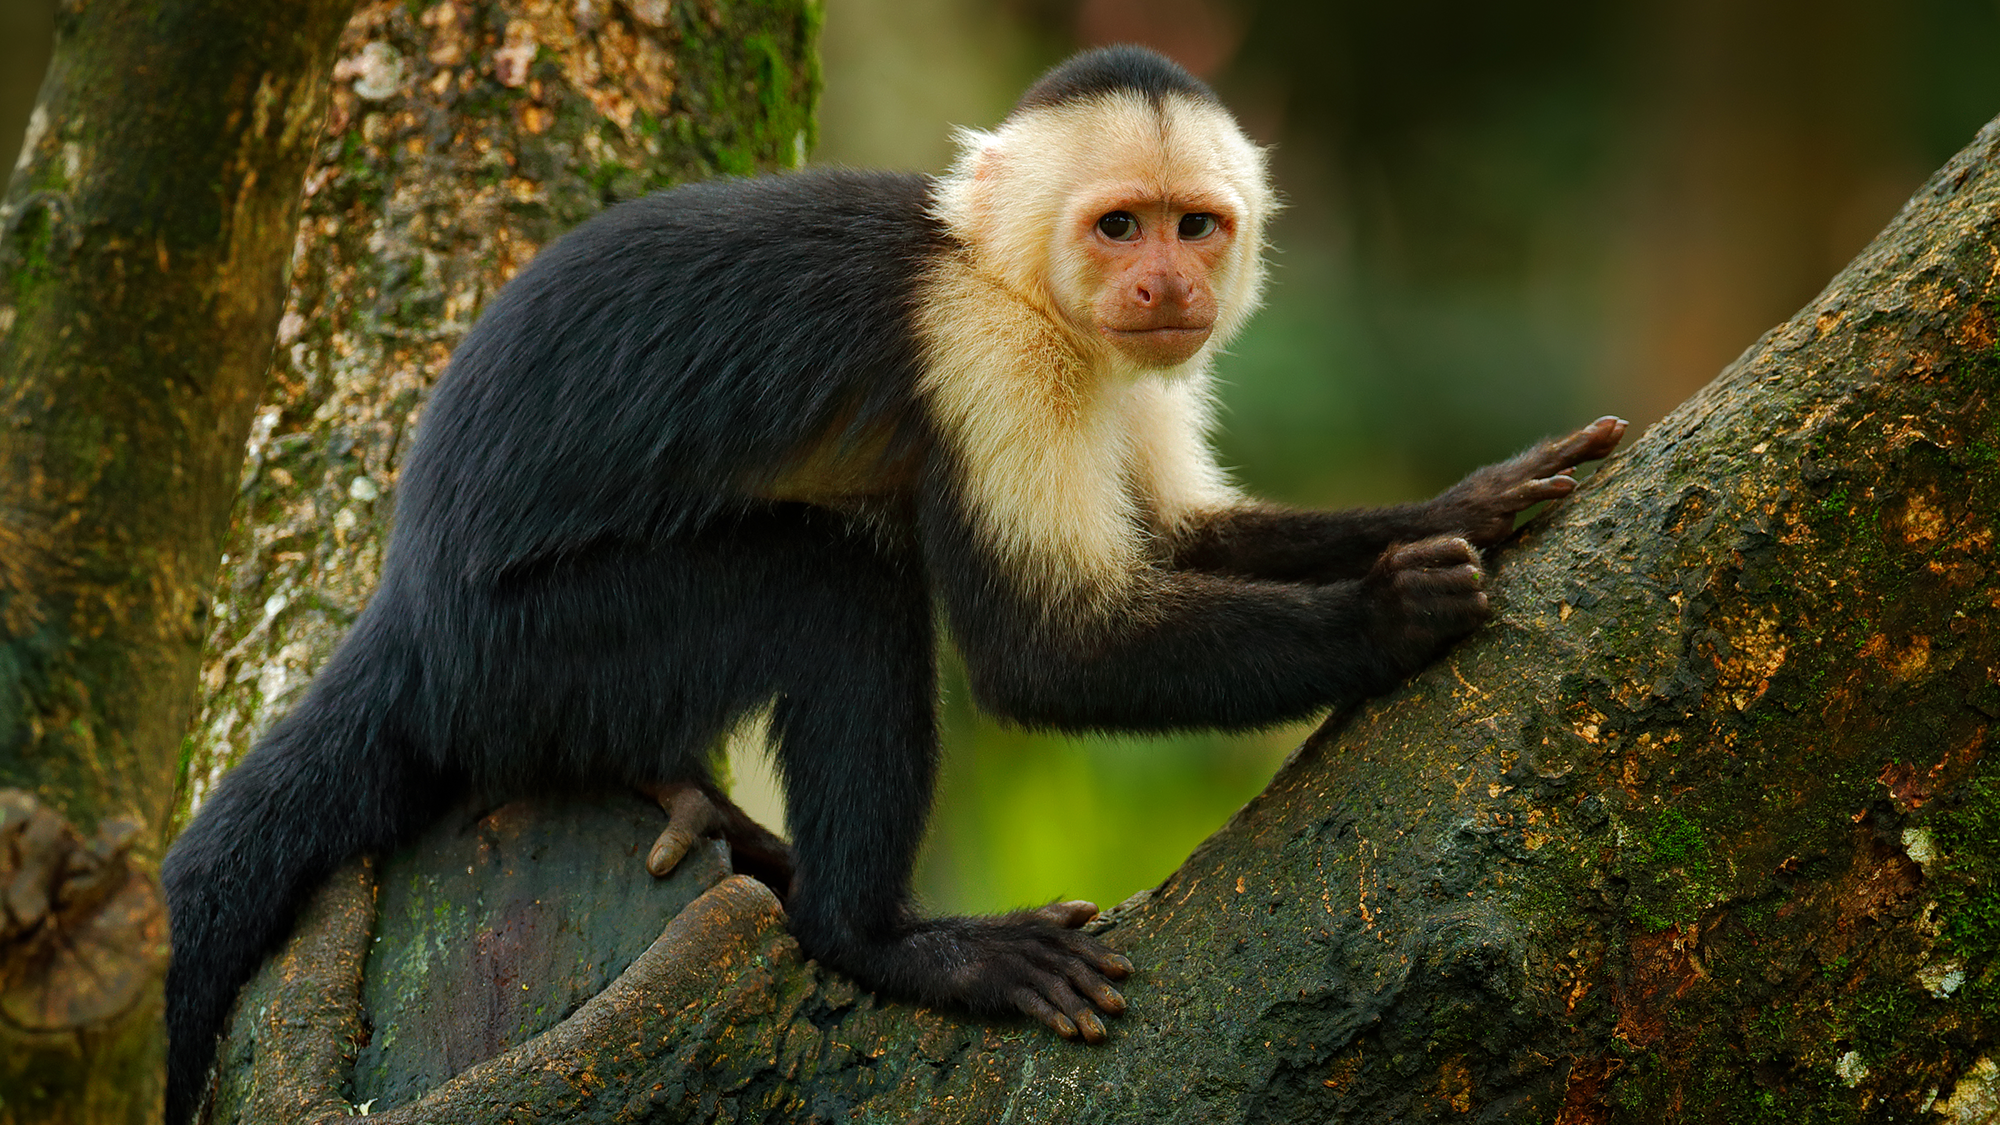 A capuchin monkey in a tree looking at the camera.